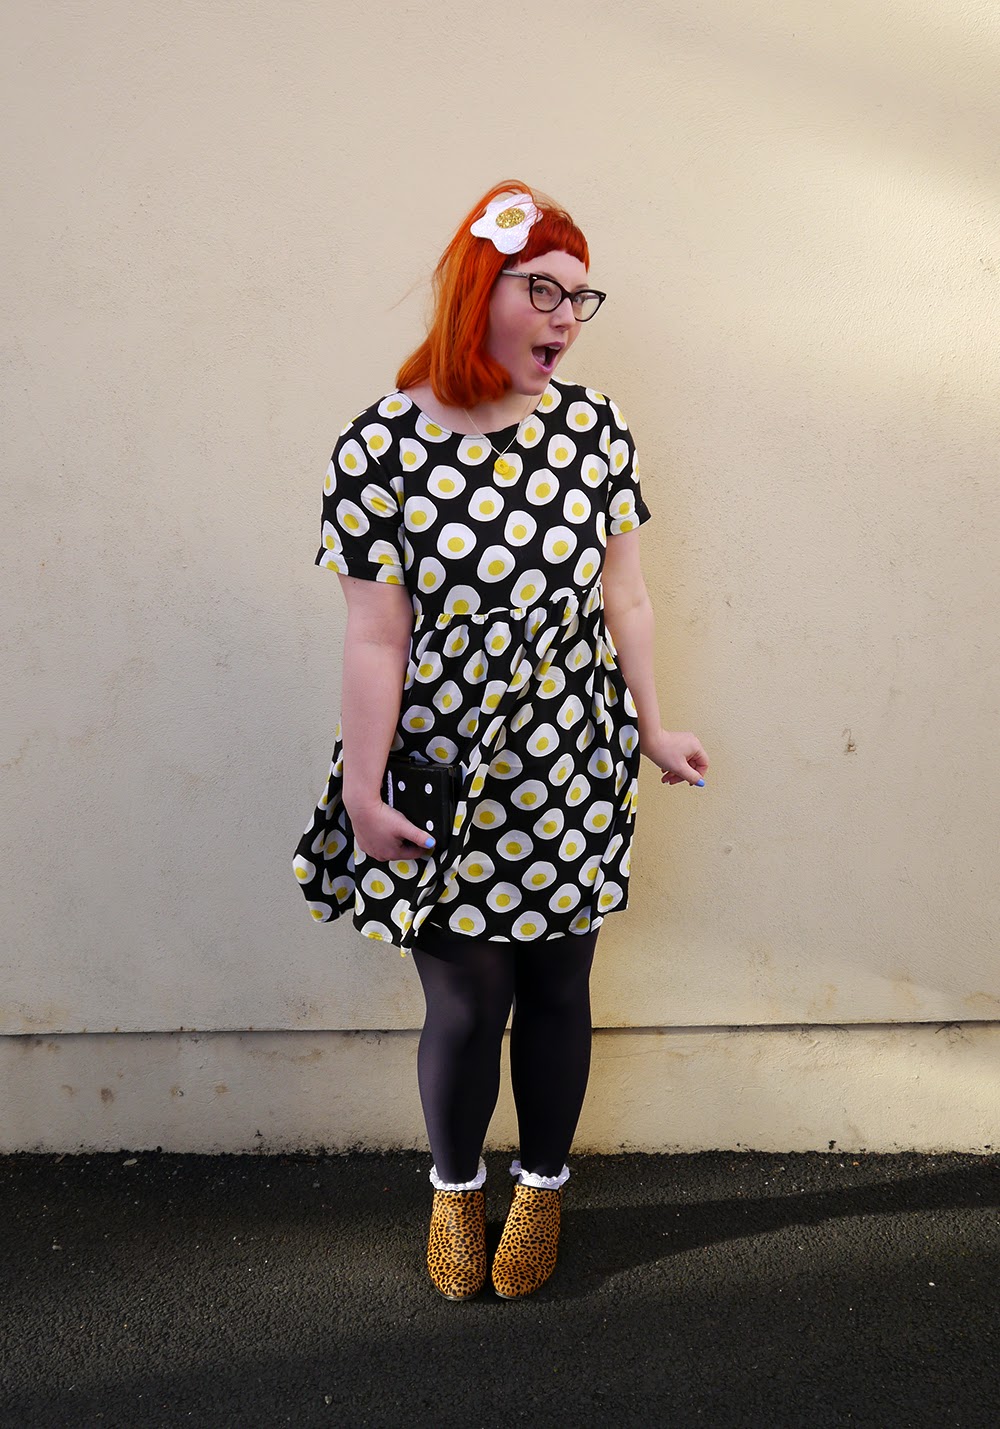 Egg themed outfit, food outfit, food style, The Whitepepper egg dress, Luna on the Moon glitter egg brooch hair clip, Nikki McWilliams party ring necklace, Duo leopard print ankle boots, frilly socks, birthday outfit, scottish blogger, Next domino clutch bag, red head, ginger blogger